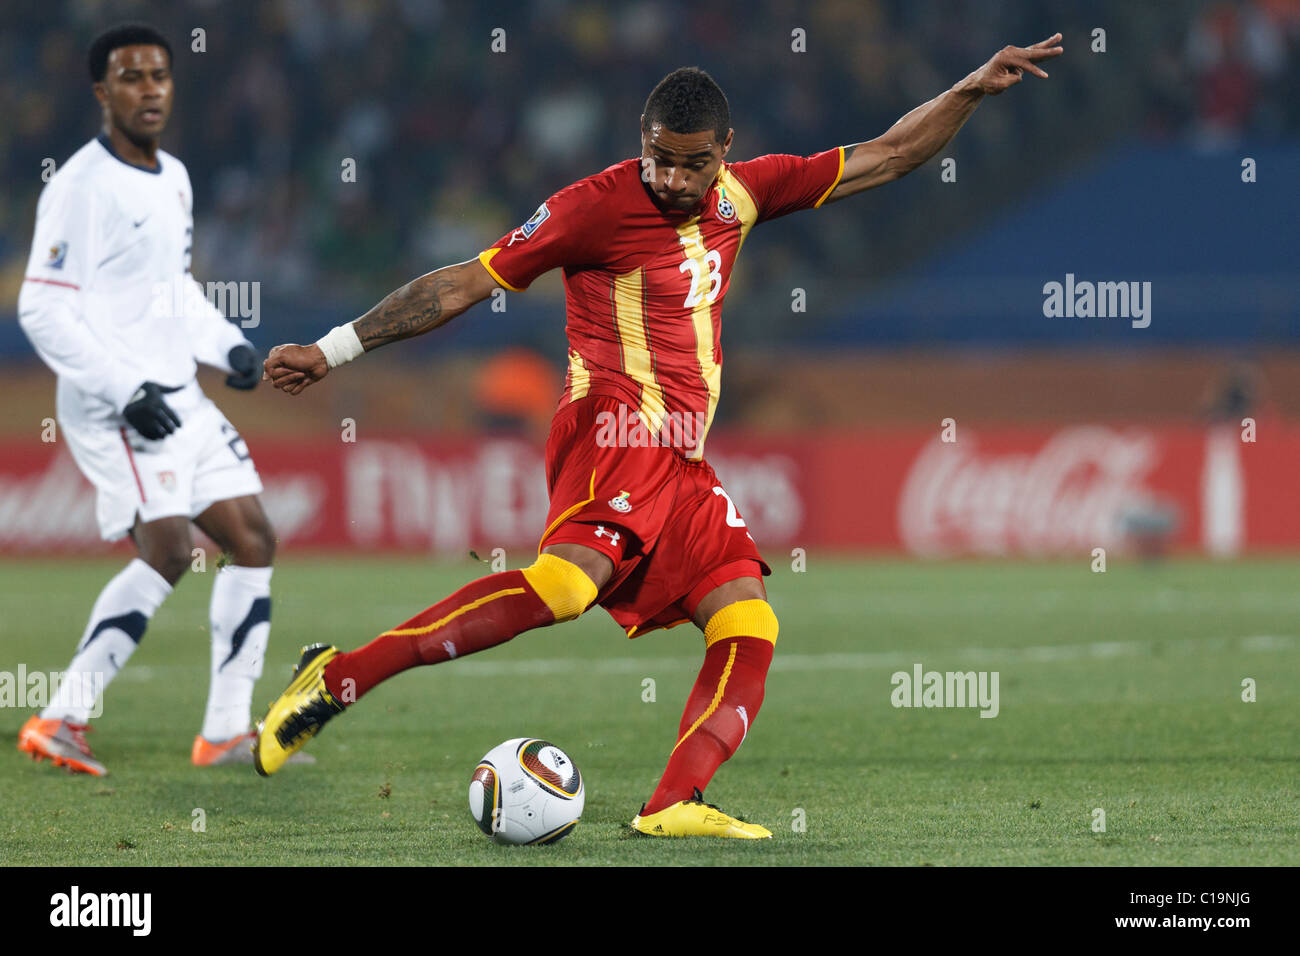 Kevin Prince Boateng of Ghana sets to shoot the ball against the United States during a FIFA World Cup round of 16 match. Stock Photo